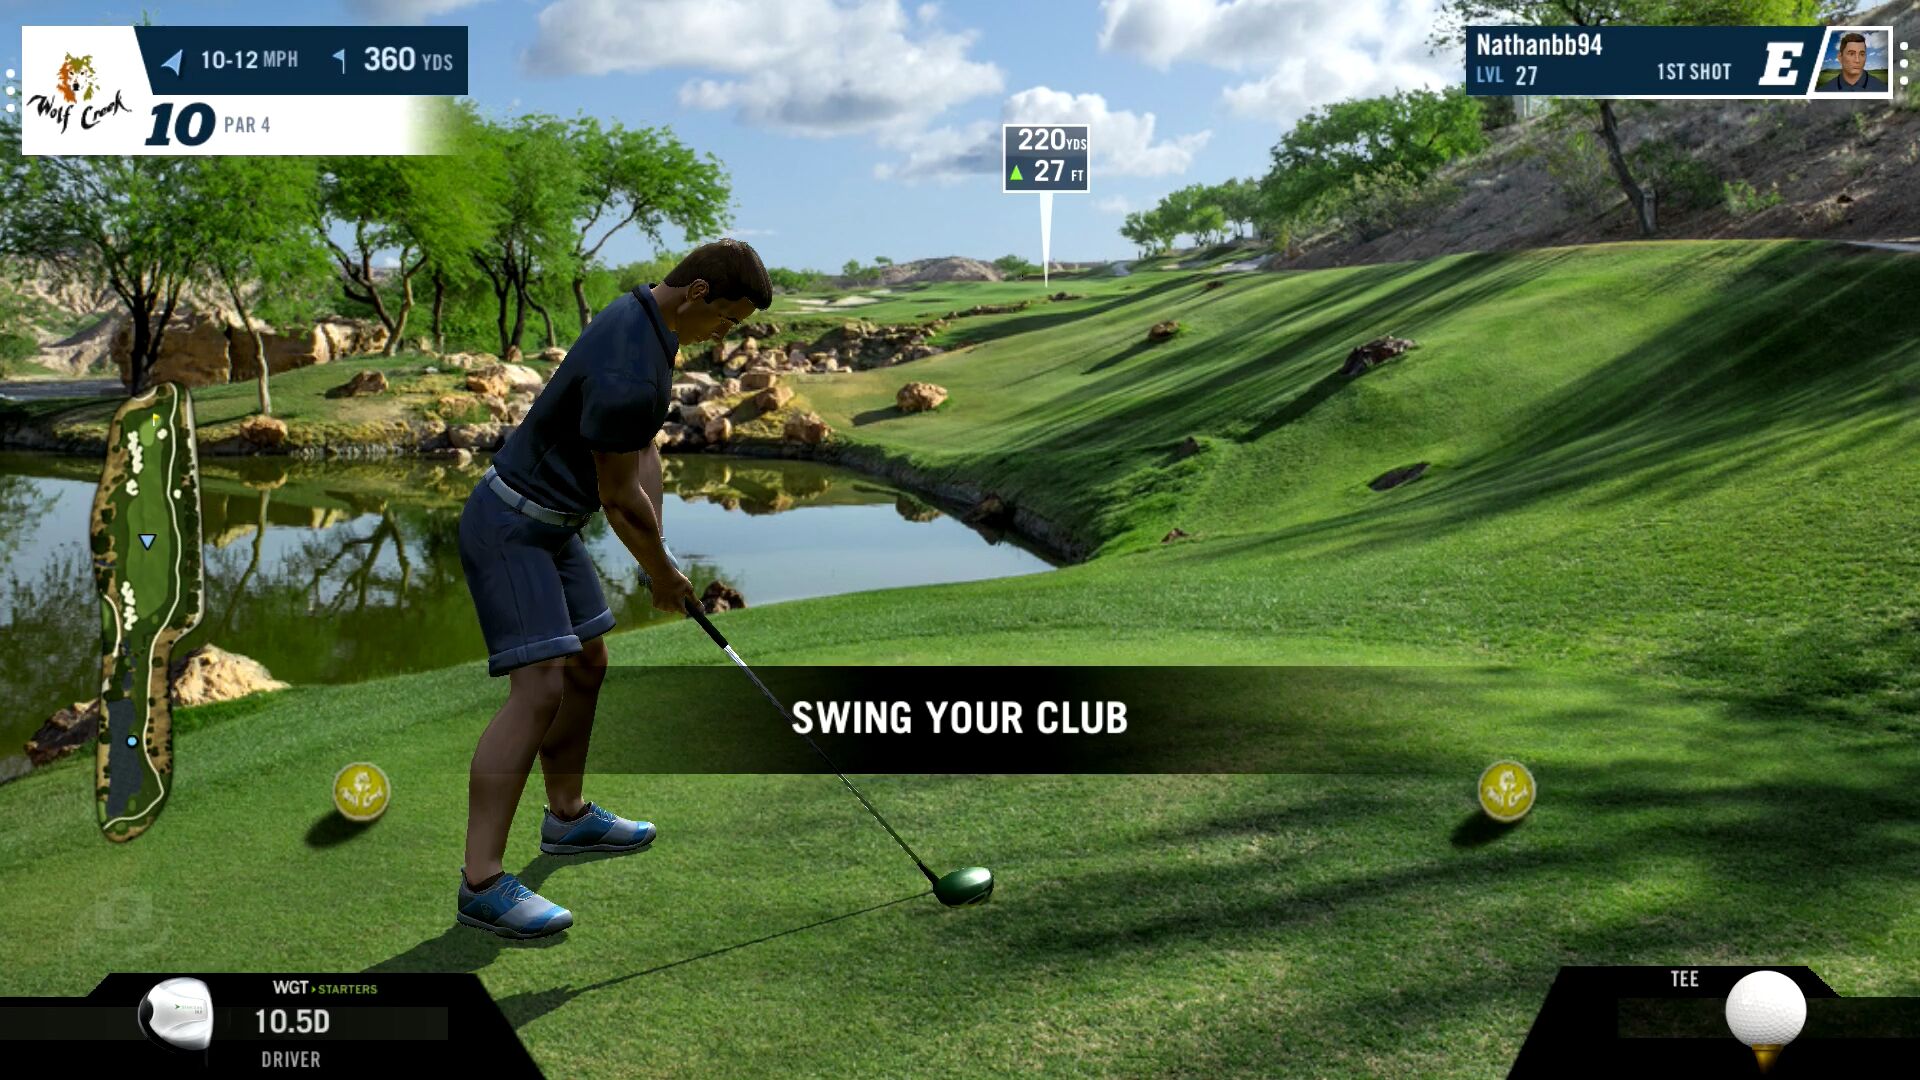 The perfect golf game to keep you sane during the coronavirus outbreak